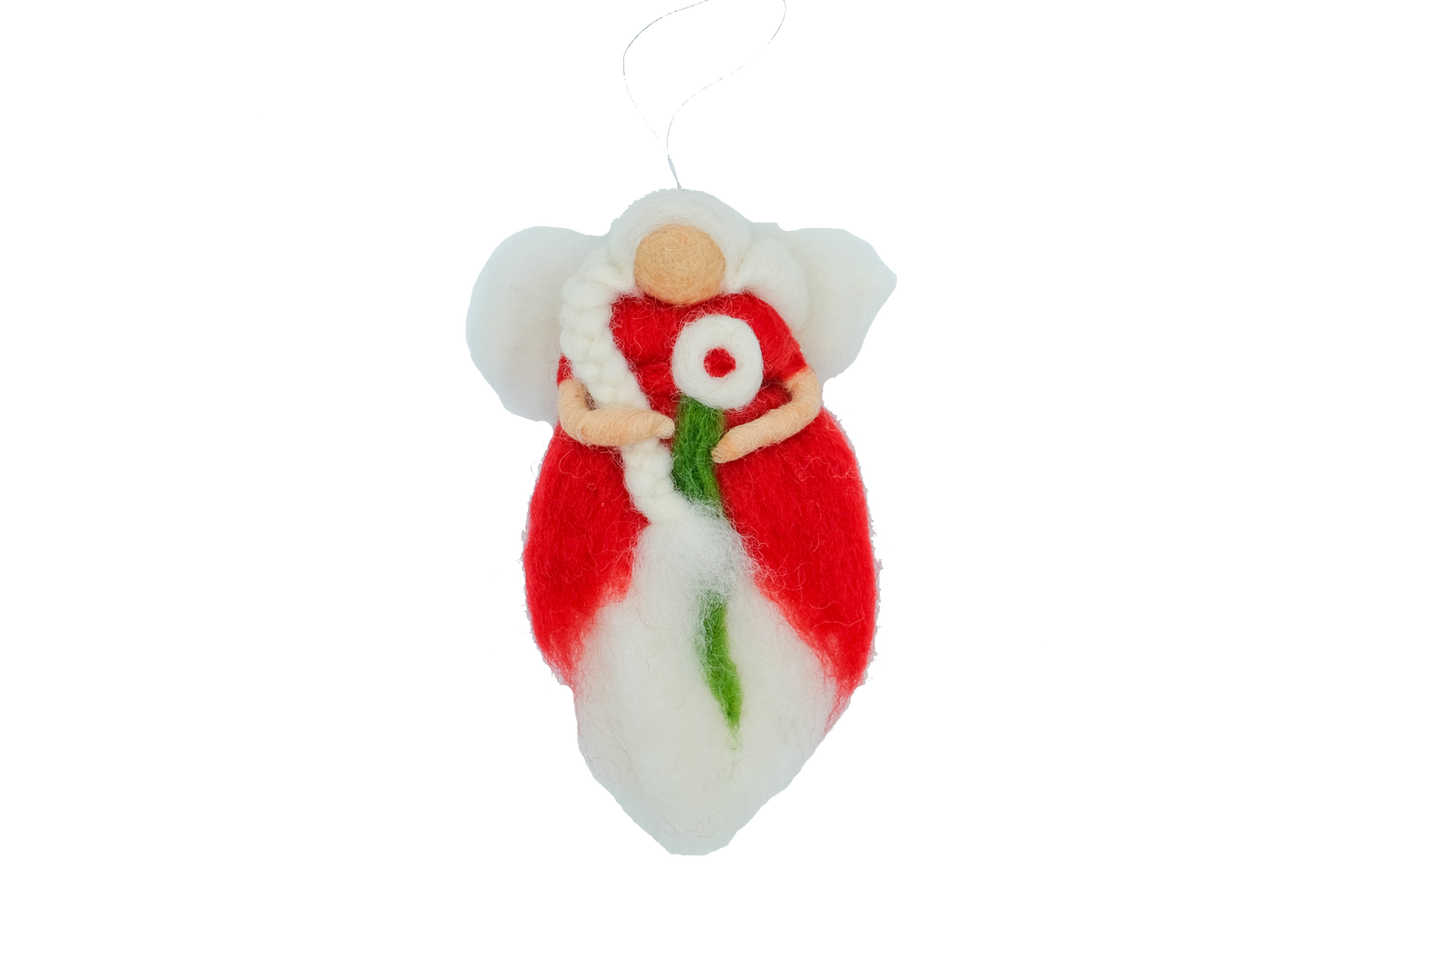 This Global Groove Life, handmade, ethical, fair trade, eco-friendly, sustainable, felt, red forest fairy angel ornament  was created by artisans in Kathmandu Nepal  and will be a beautiful addition to your Christmas tree this holiday season.